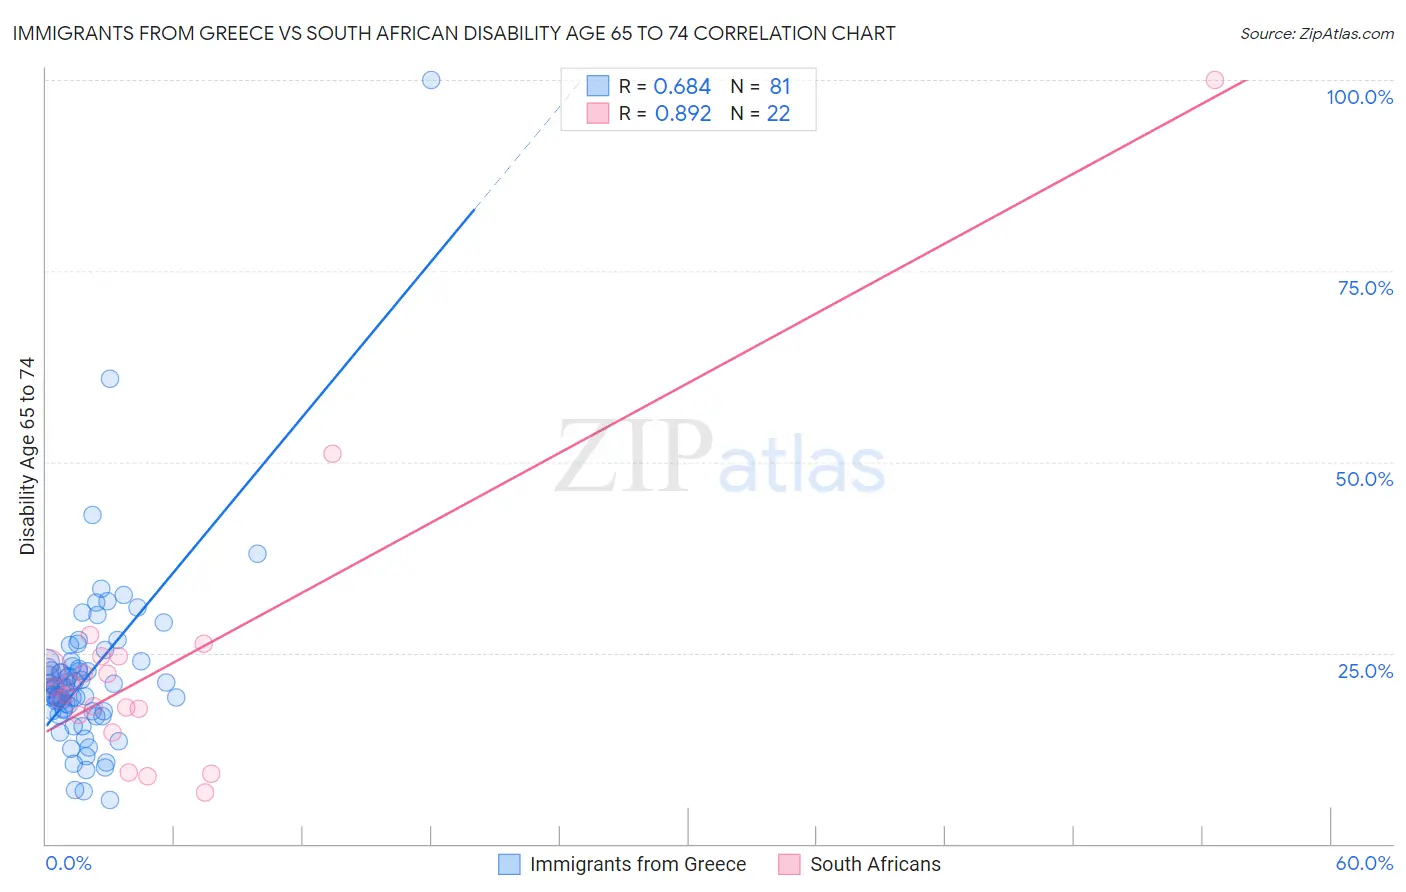 Immigrants from Greece vs South African Disability Age 65 to 74